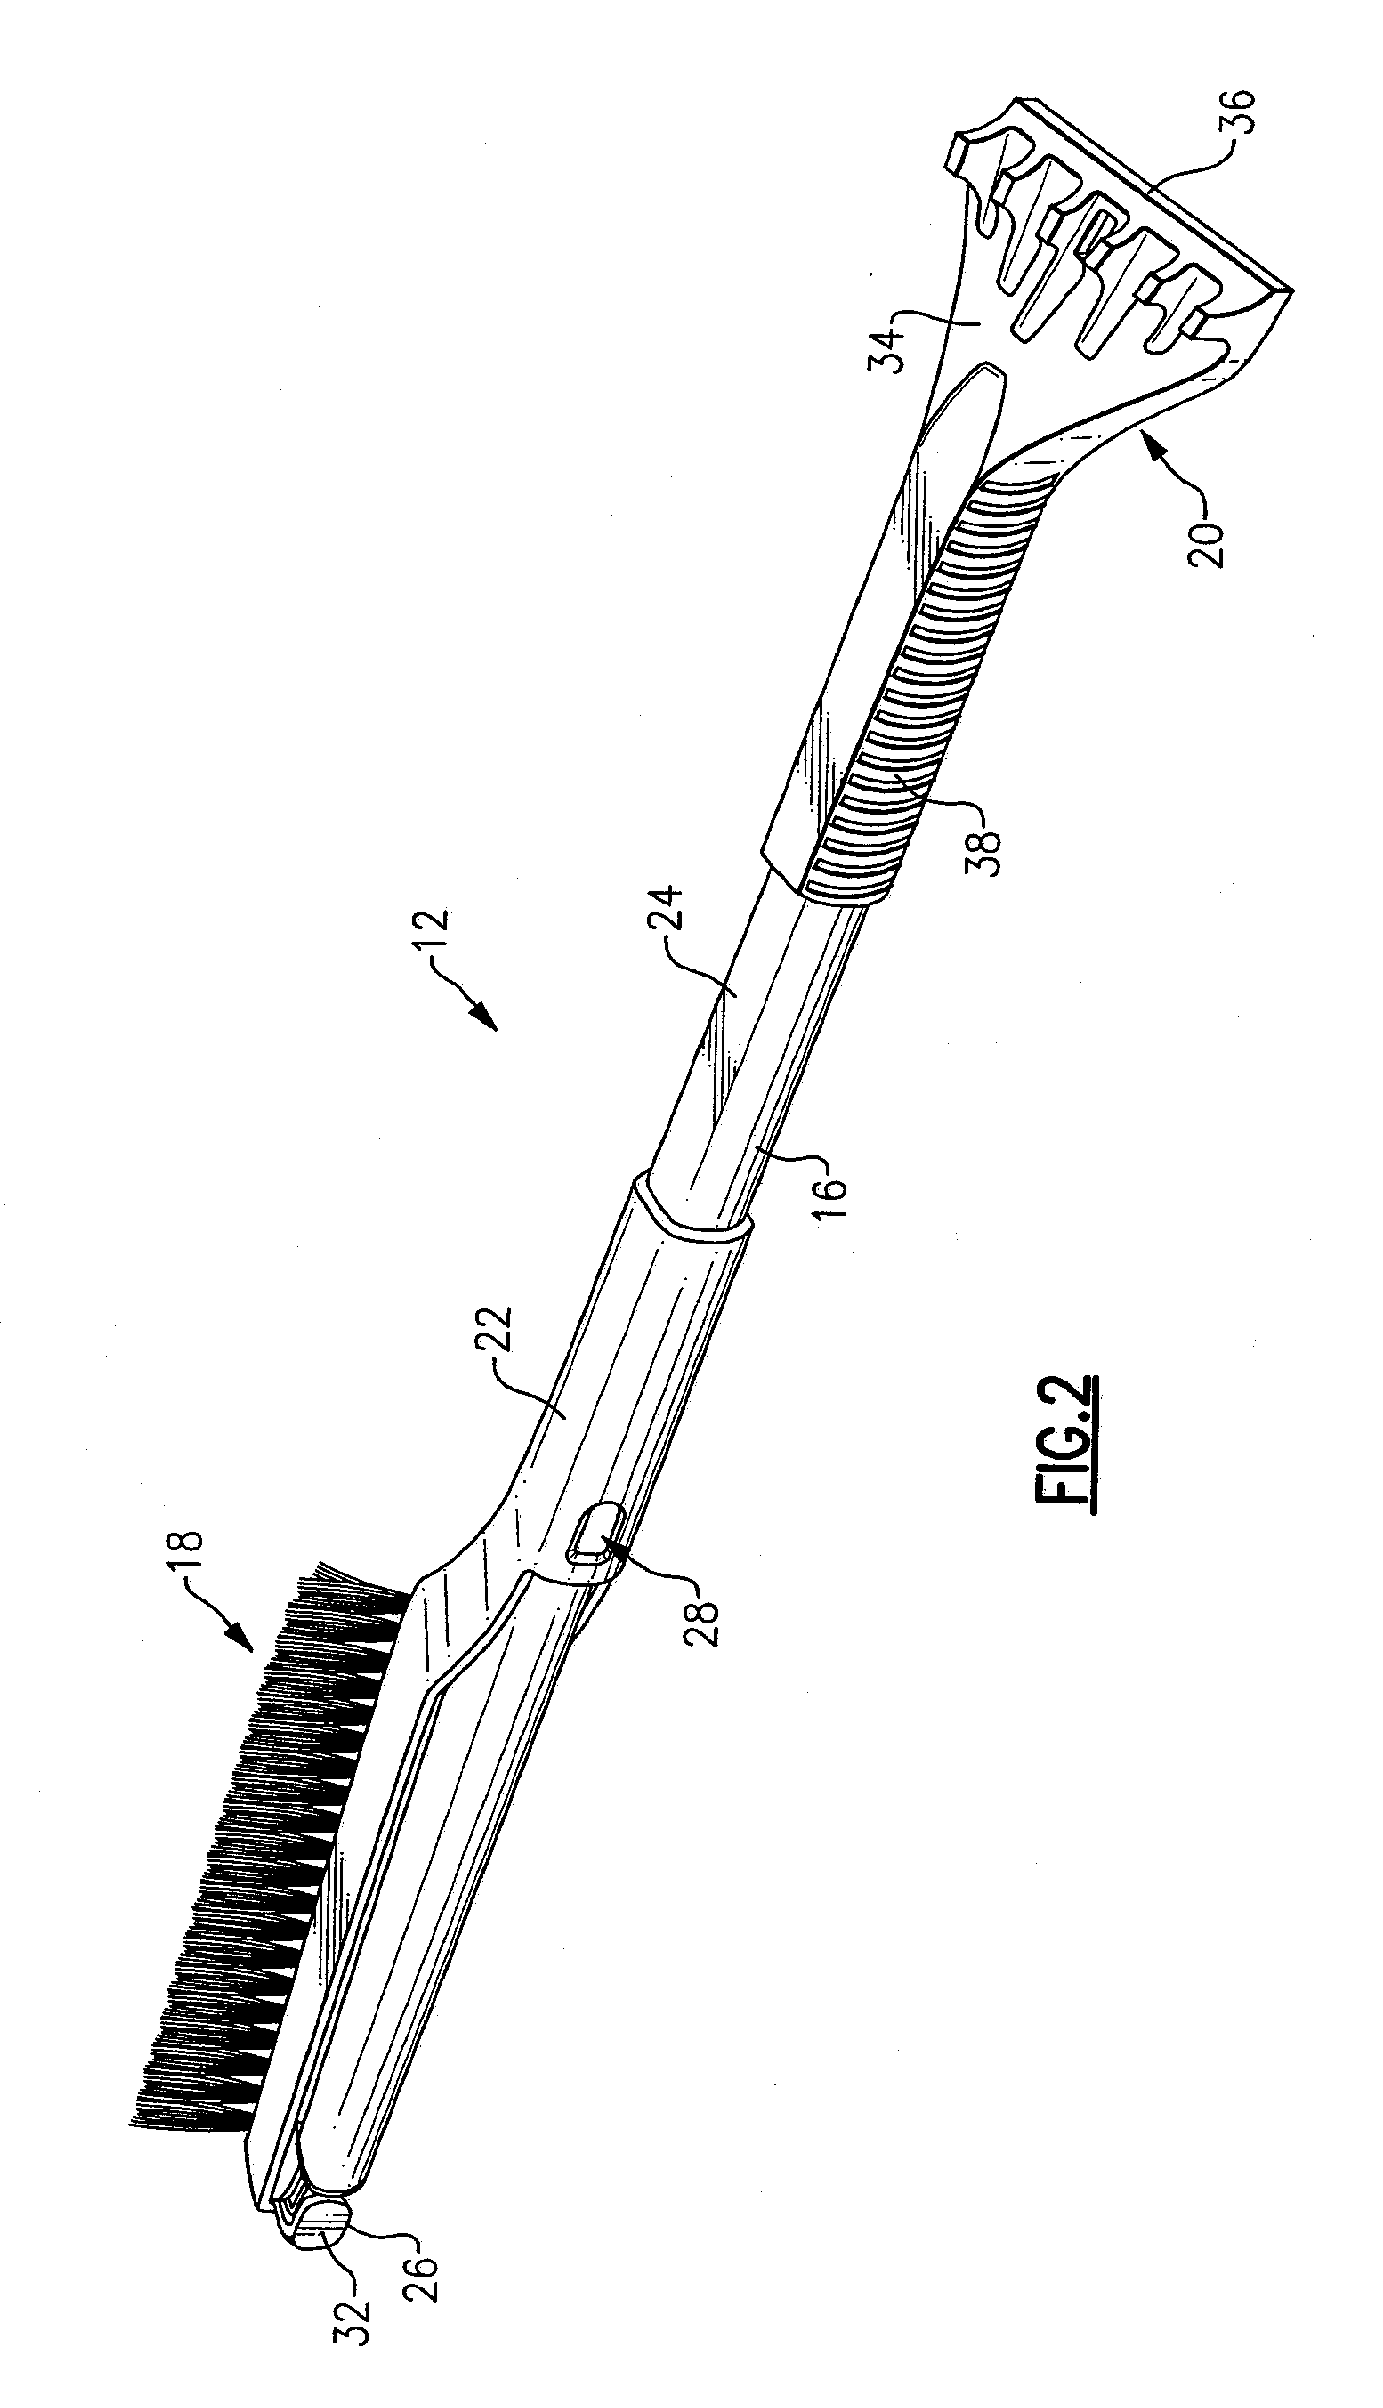 Combination Snow Shovel and Snow Removal Tool